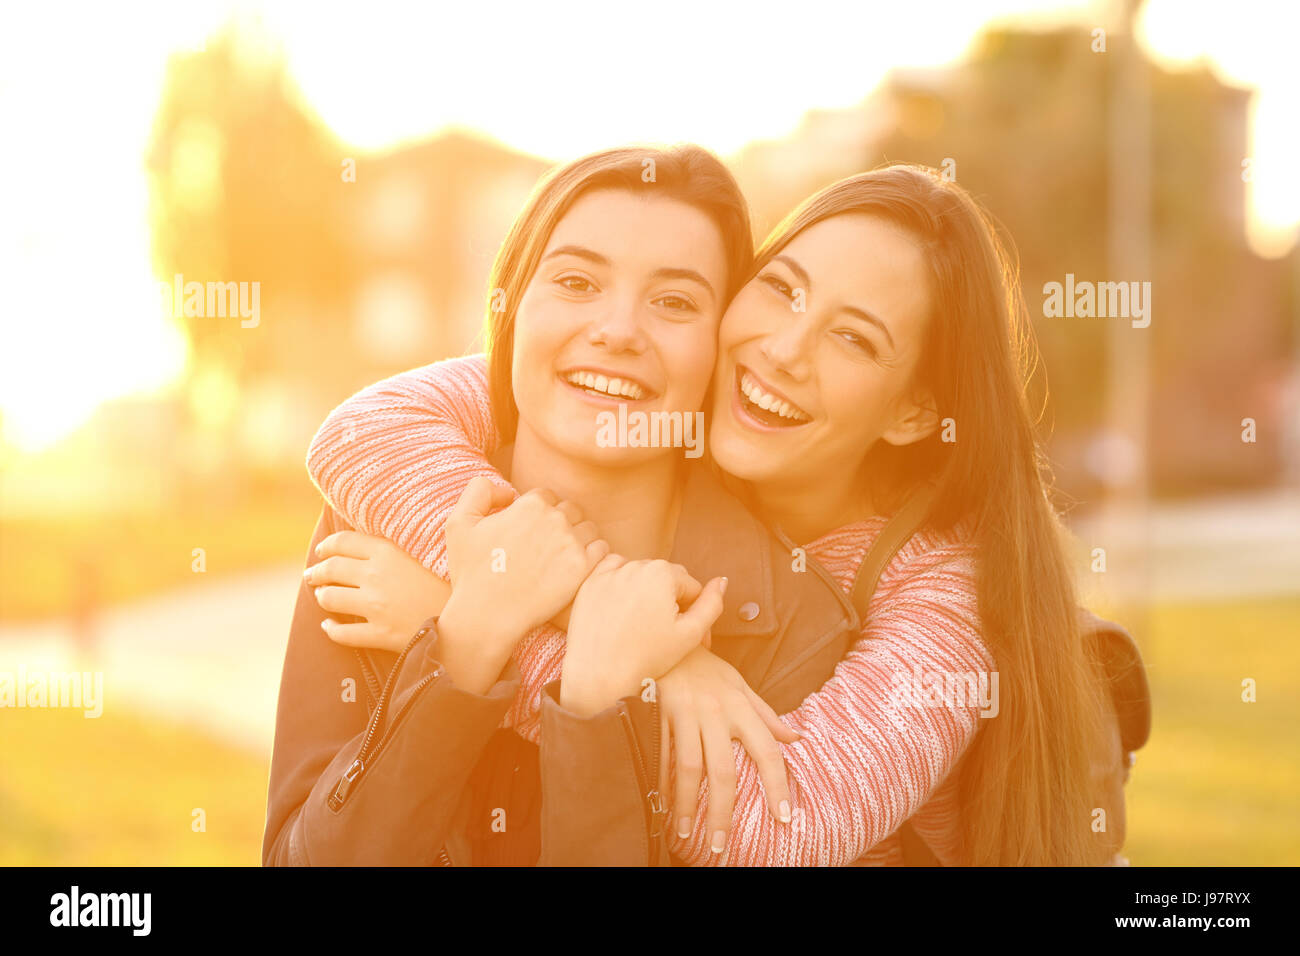 Front view portrait of two happy friends laughing and posing looking at you in the street at sunset with a warm light in the background Stock Photo